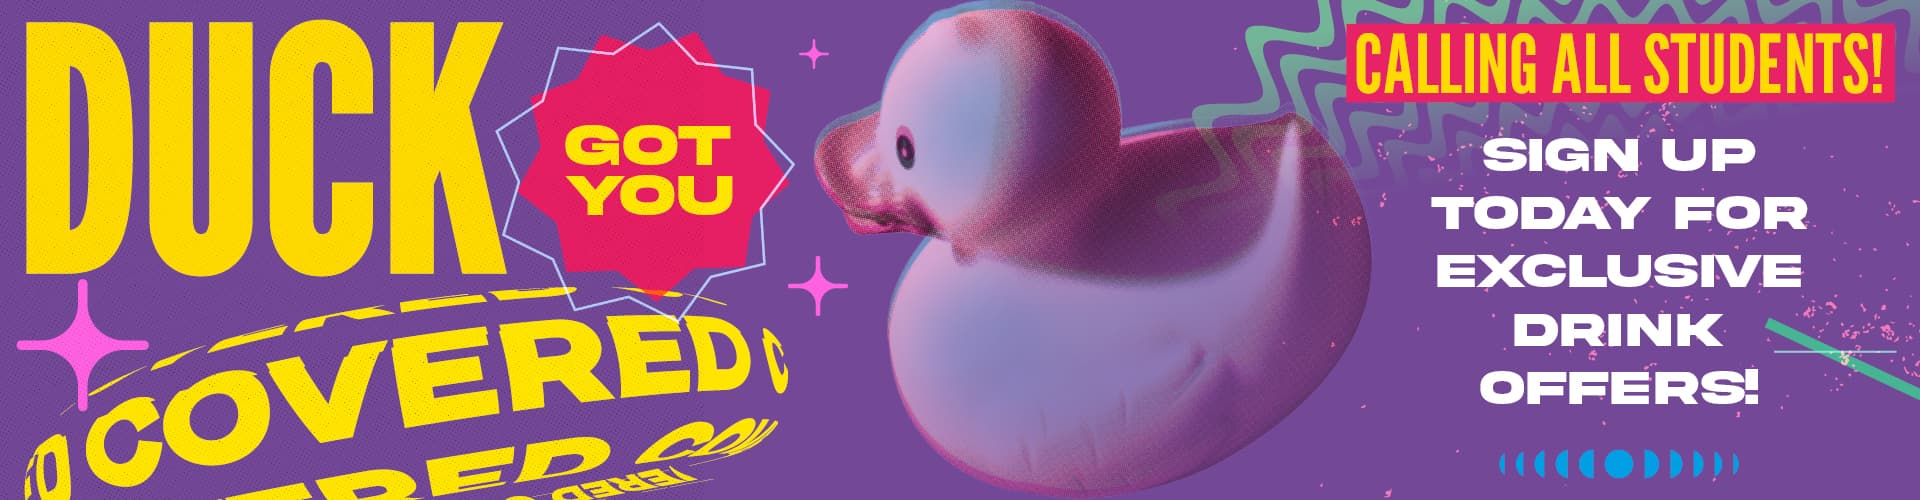 Duck got you covered! Sign up today for exclusive drink offers at Popworld